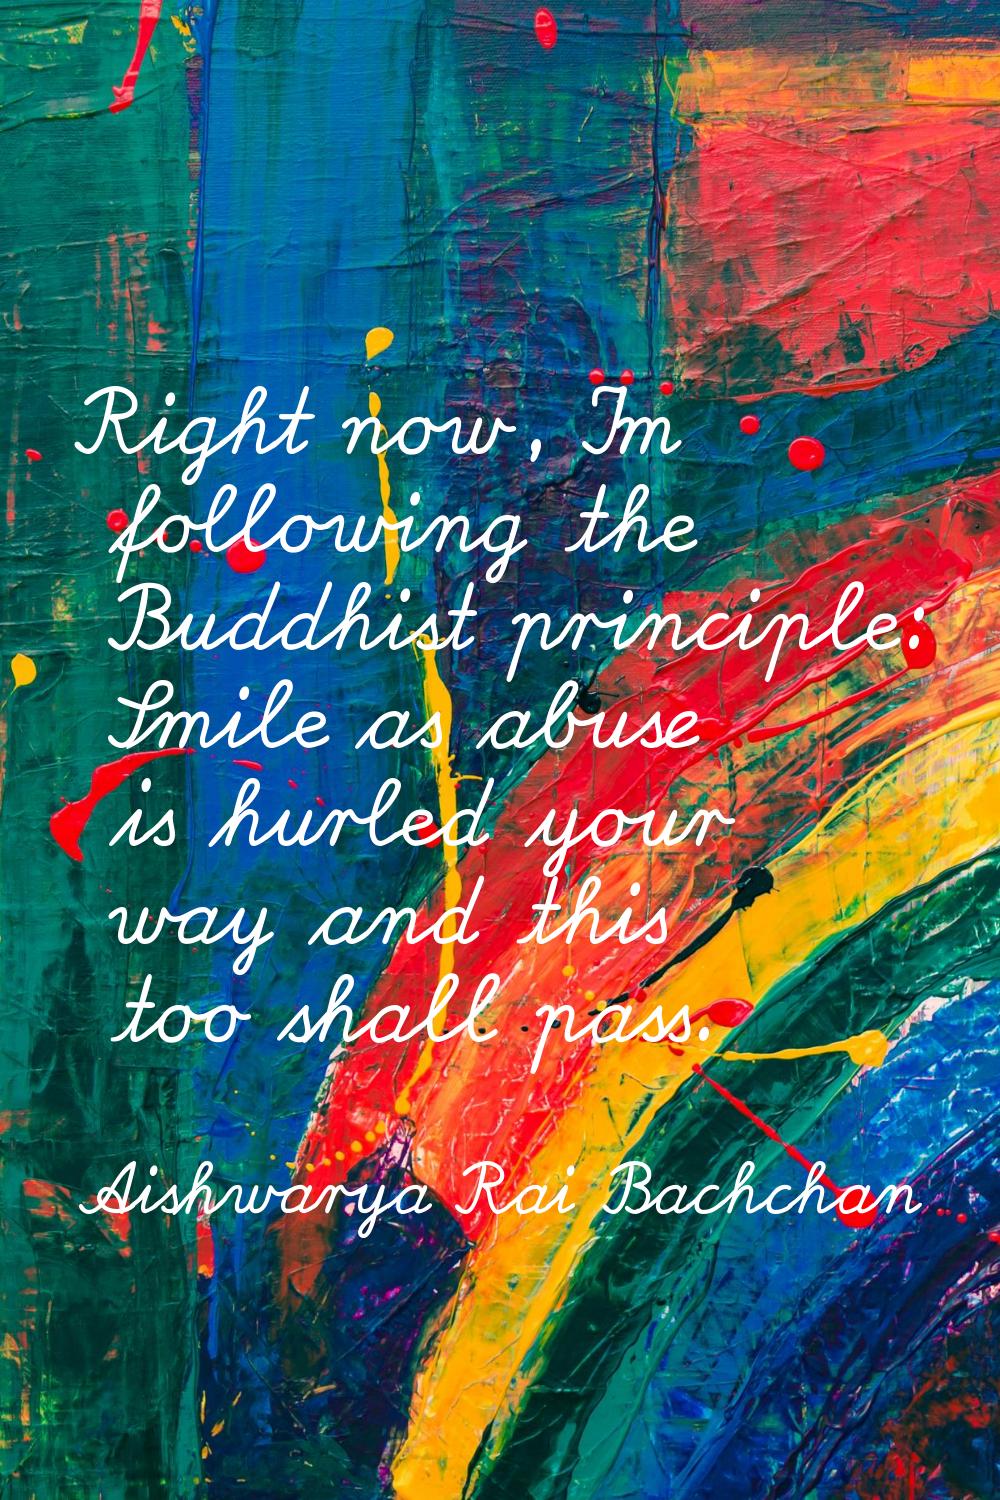 Right now, I'm following the Buddhist principle: Smile as abuse is hurled your way and this too sha